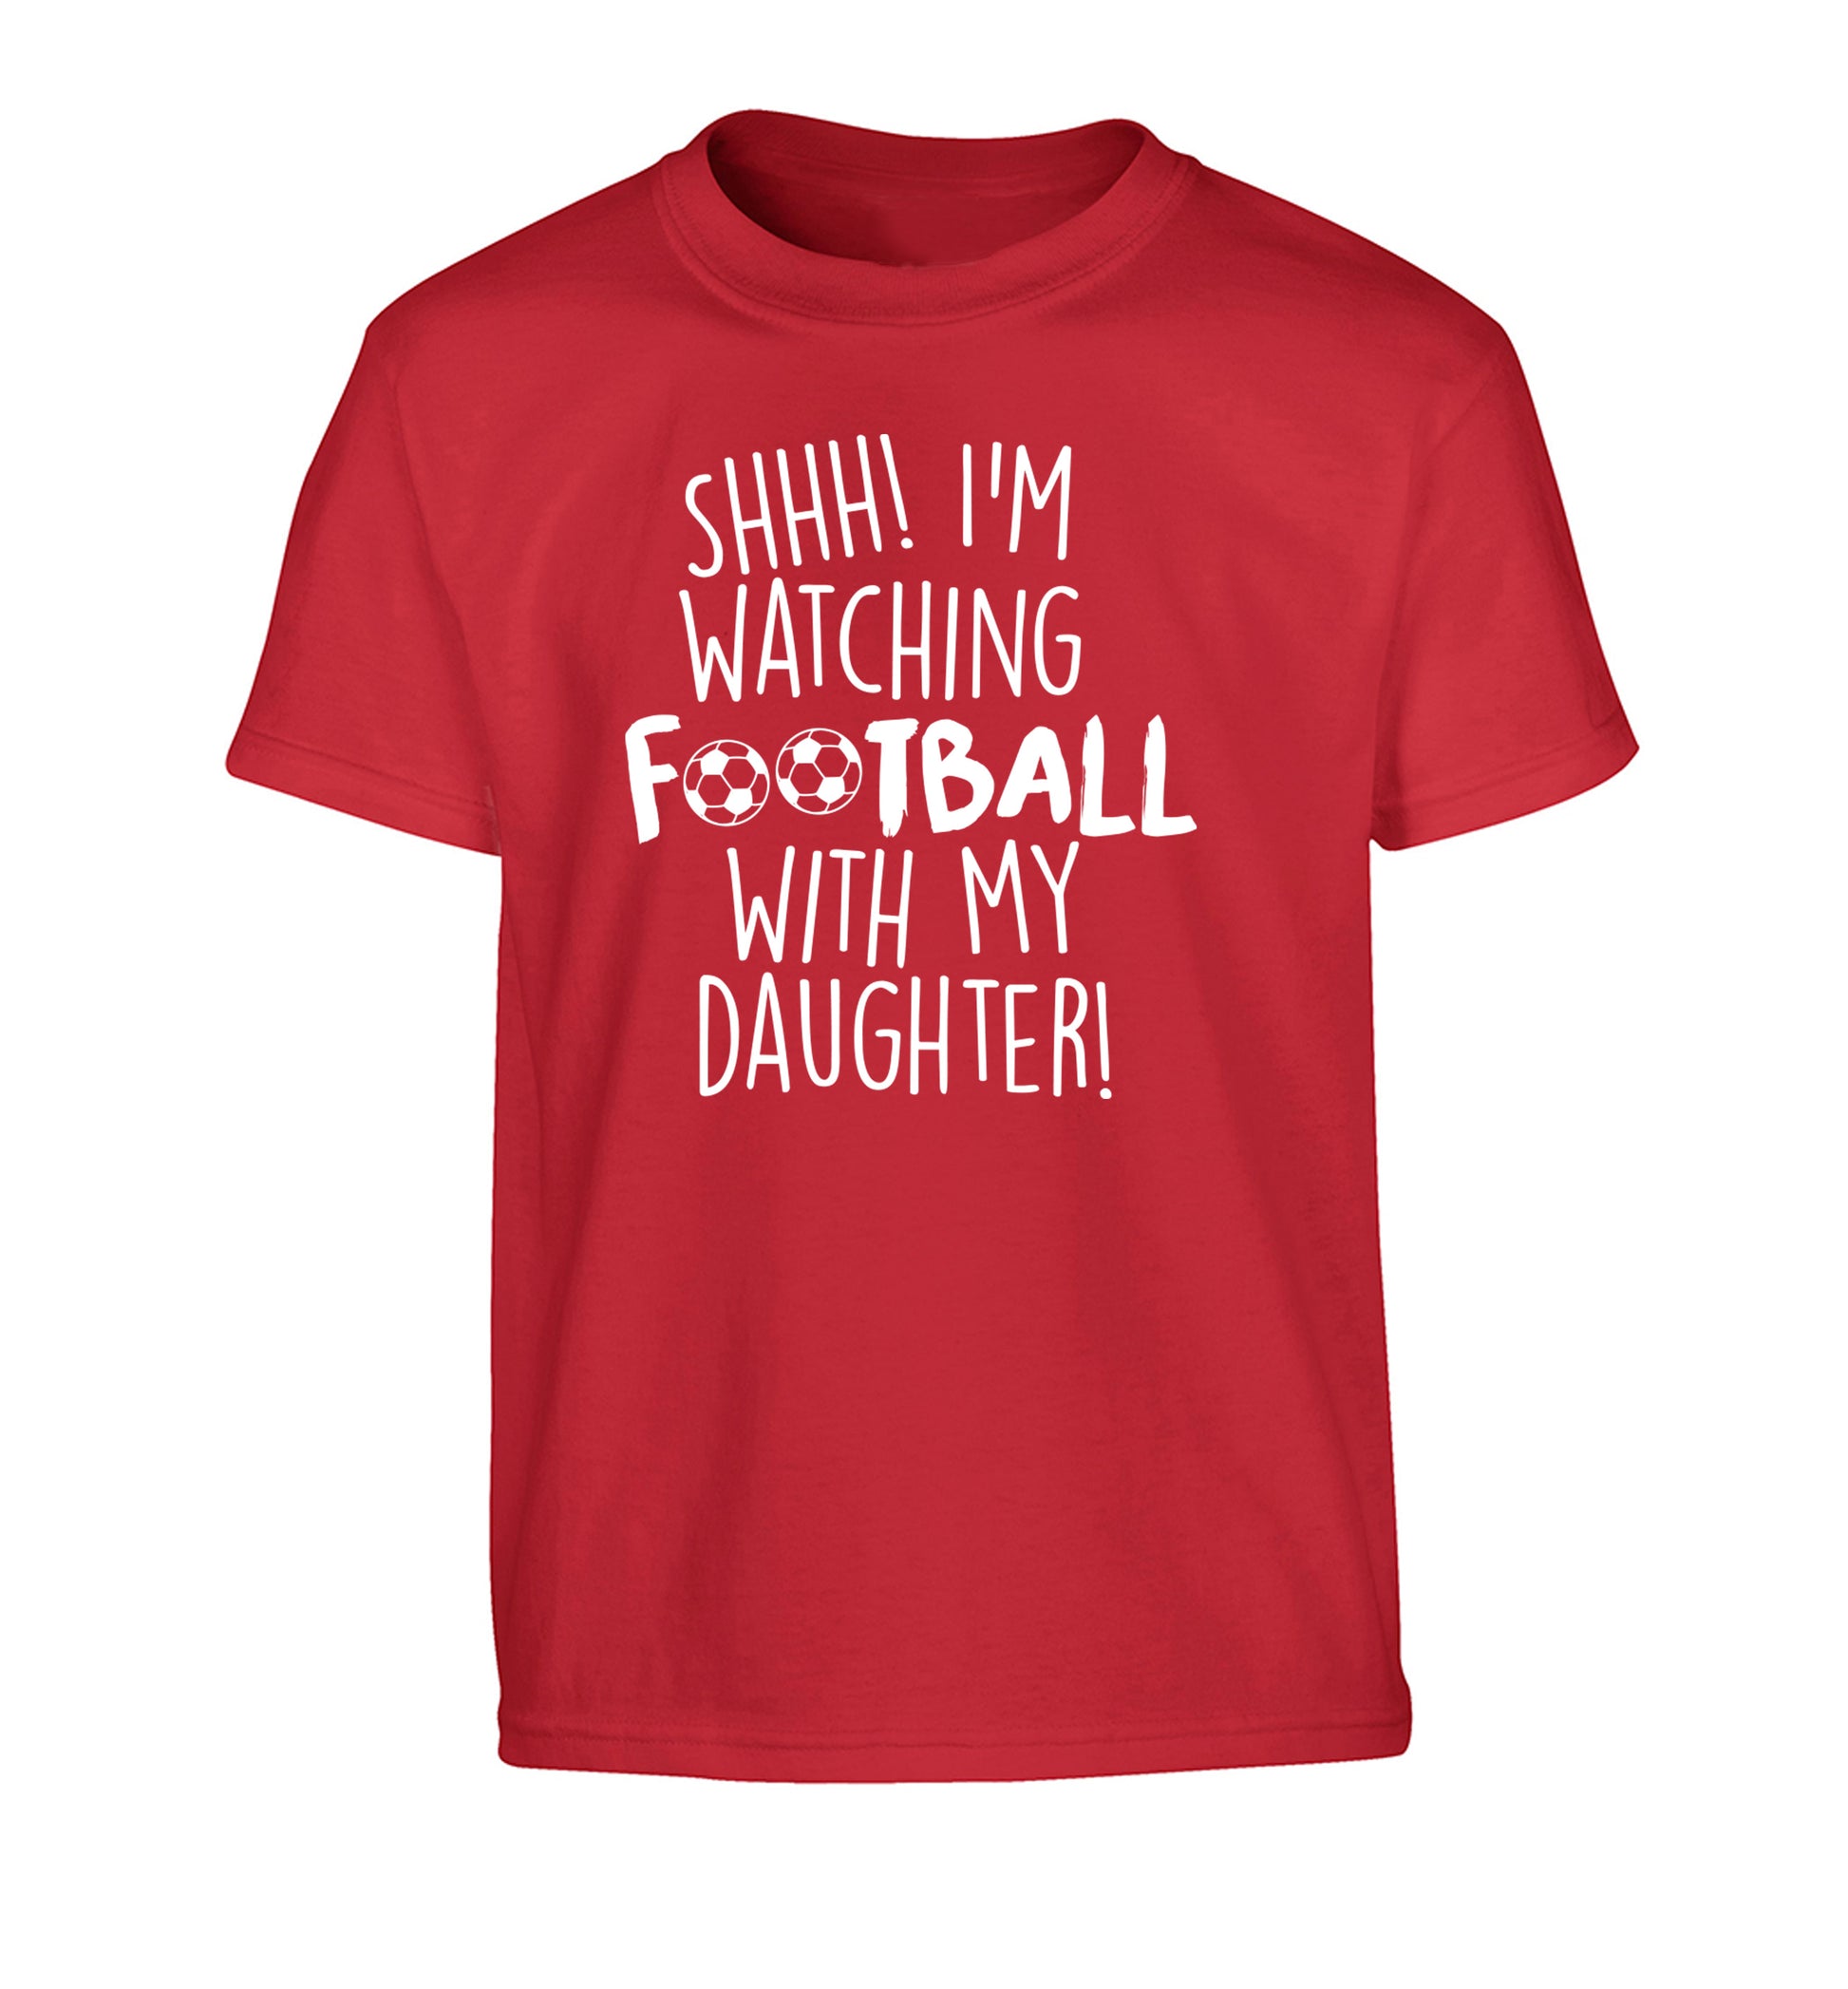 Shhh I'm watching football with my daughter Children's red Tshirt 12-14 Years